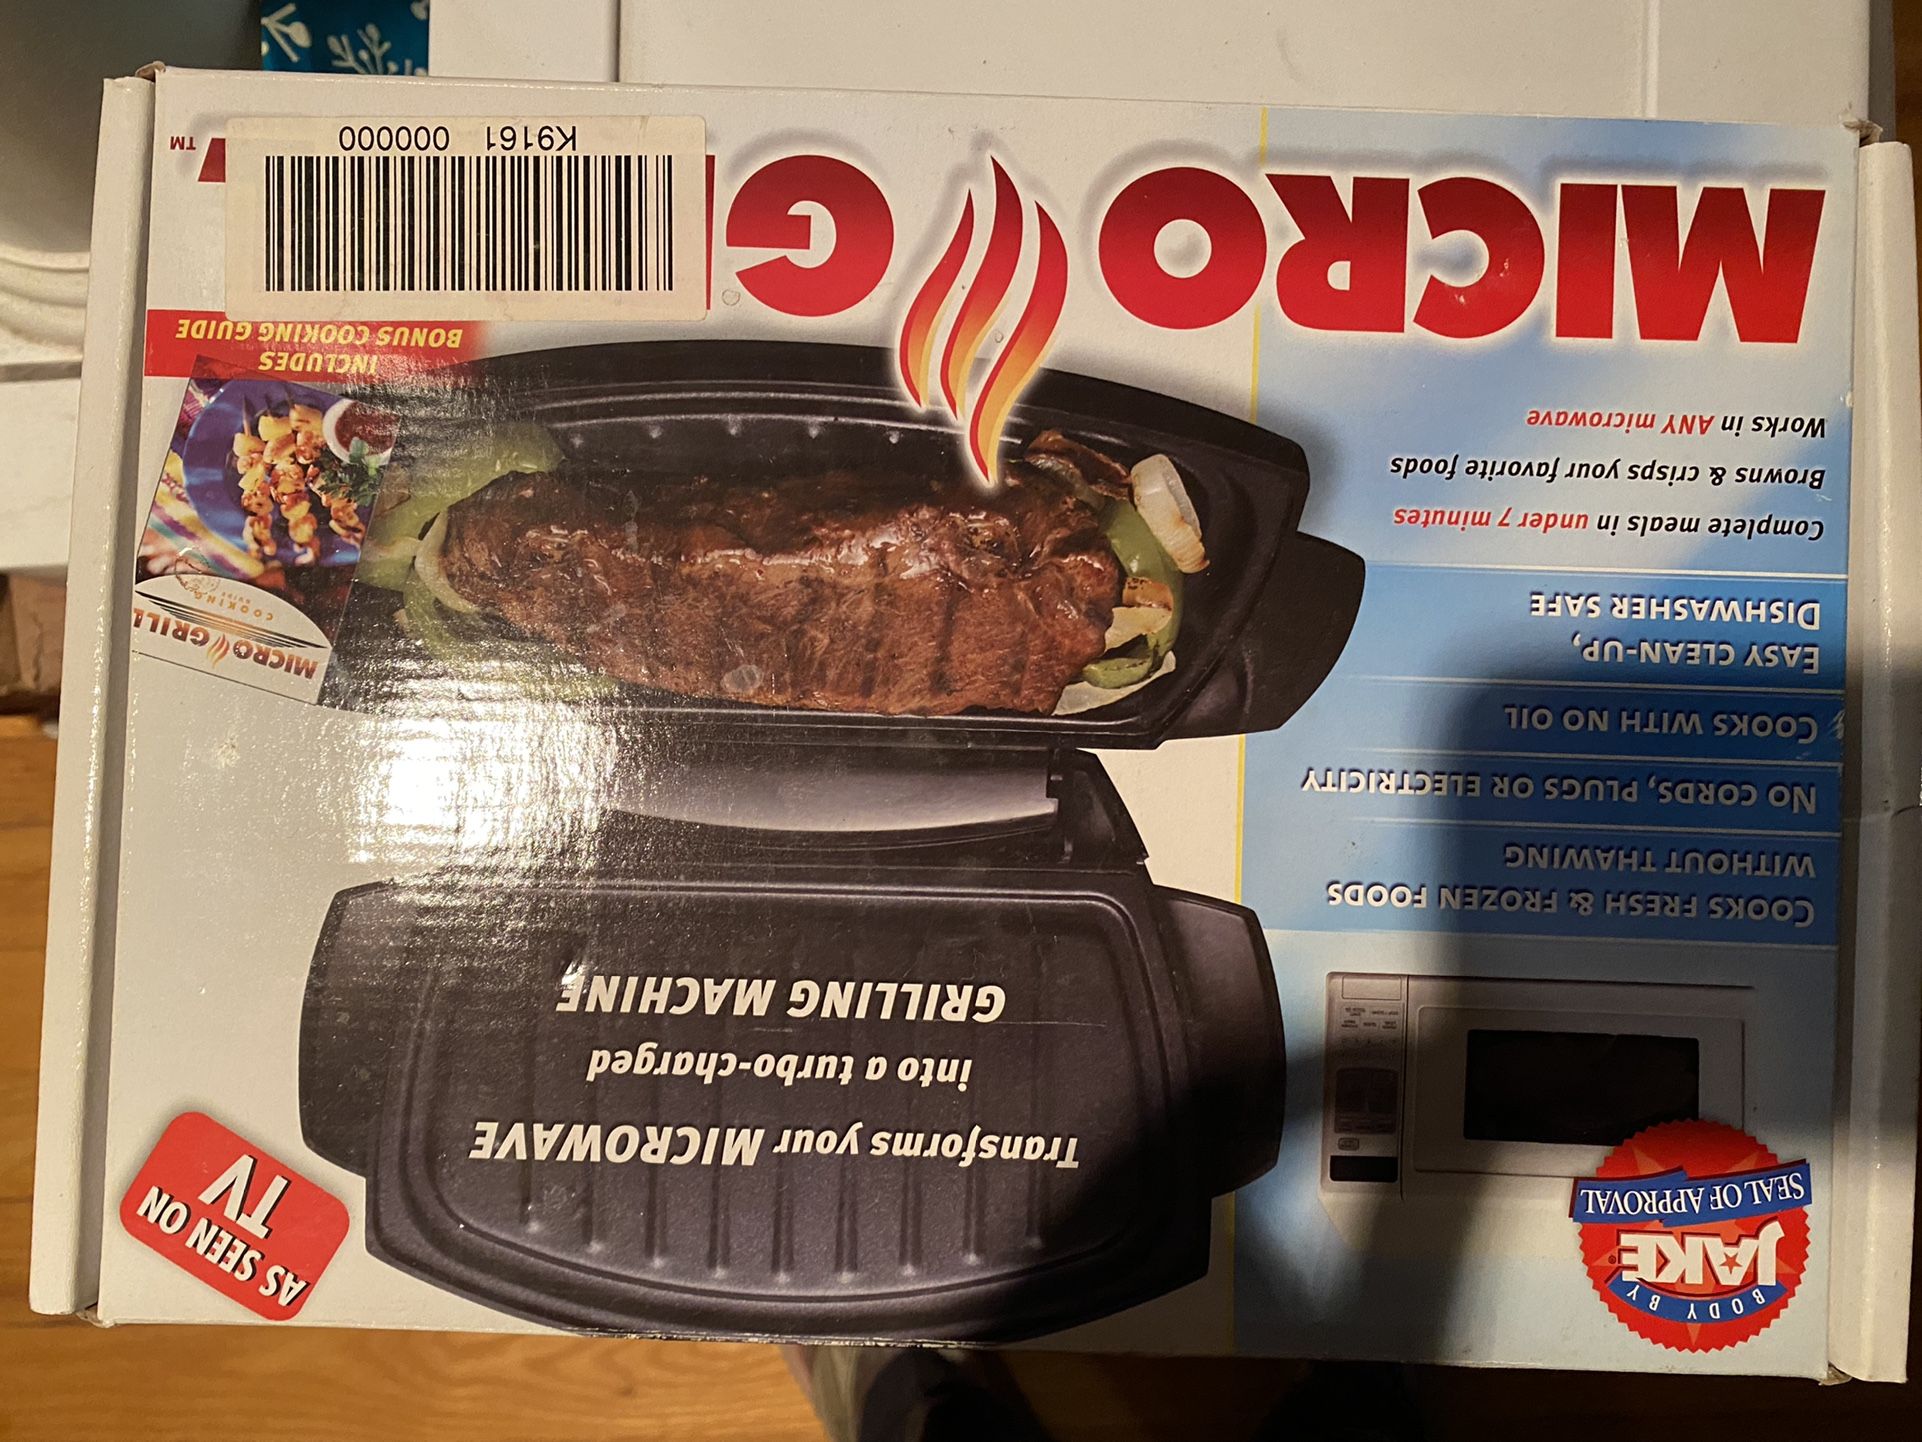 Micro Grill As Seen On TV Microwave Grilling Machine 